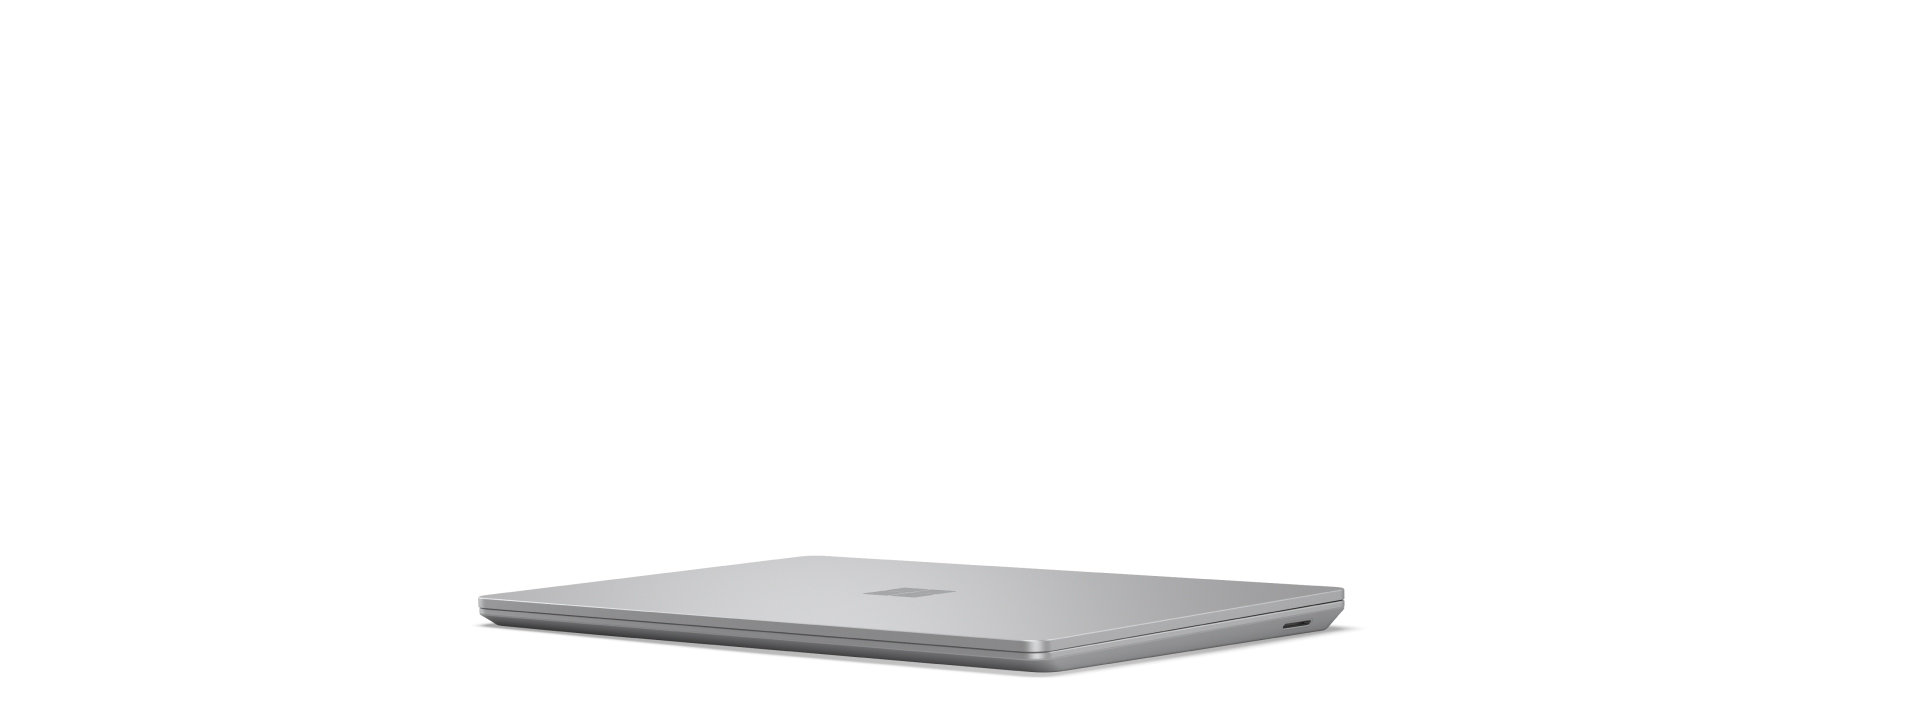 A rotating Surface Laptop Go 3 opening and closing while showing all angles of the device.